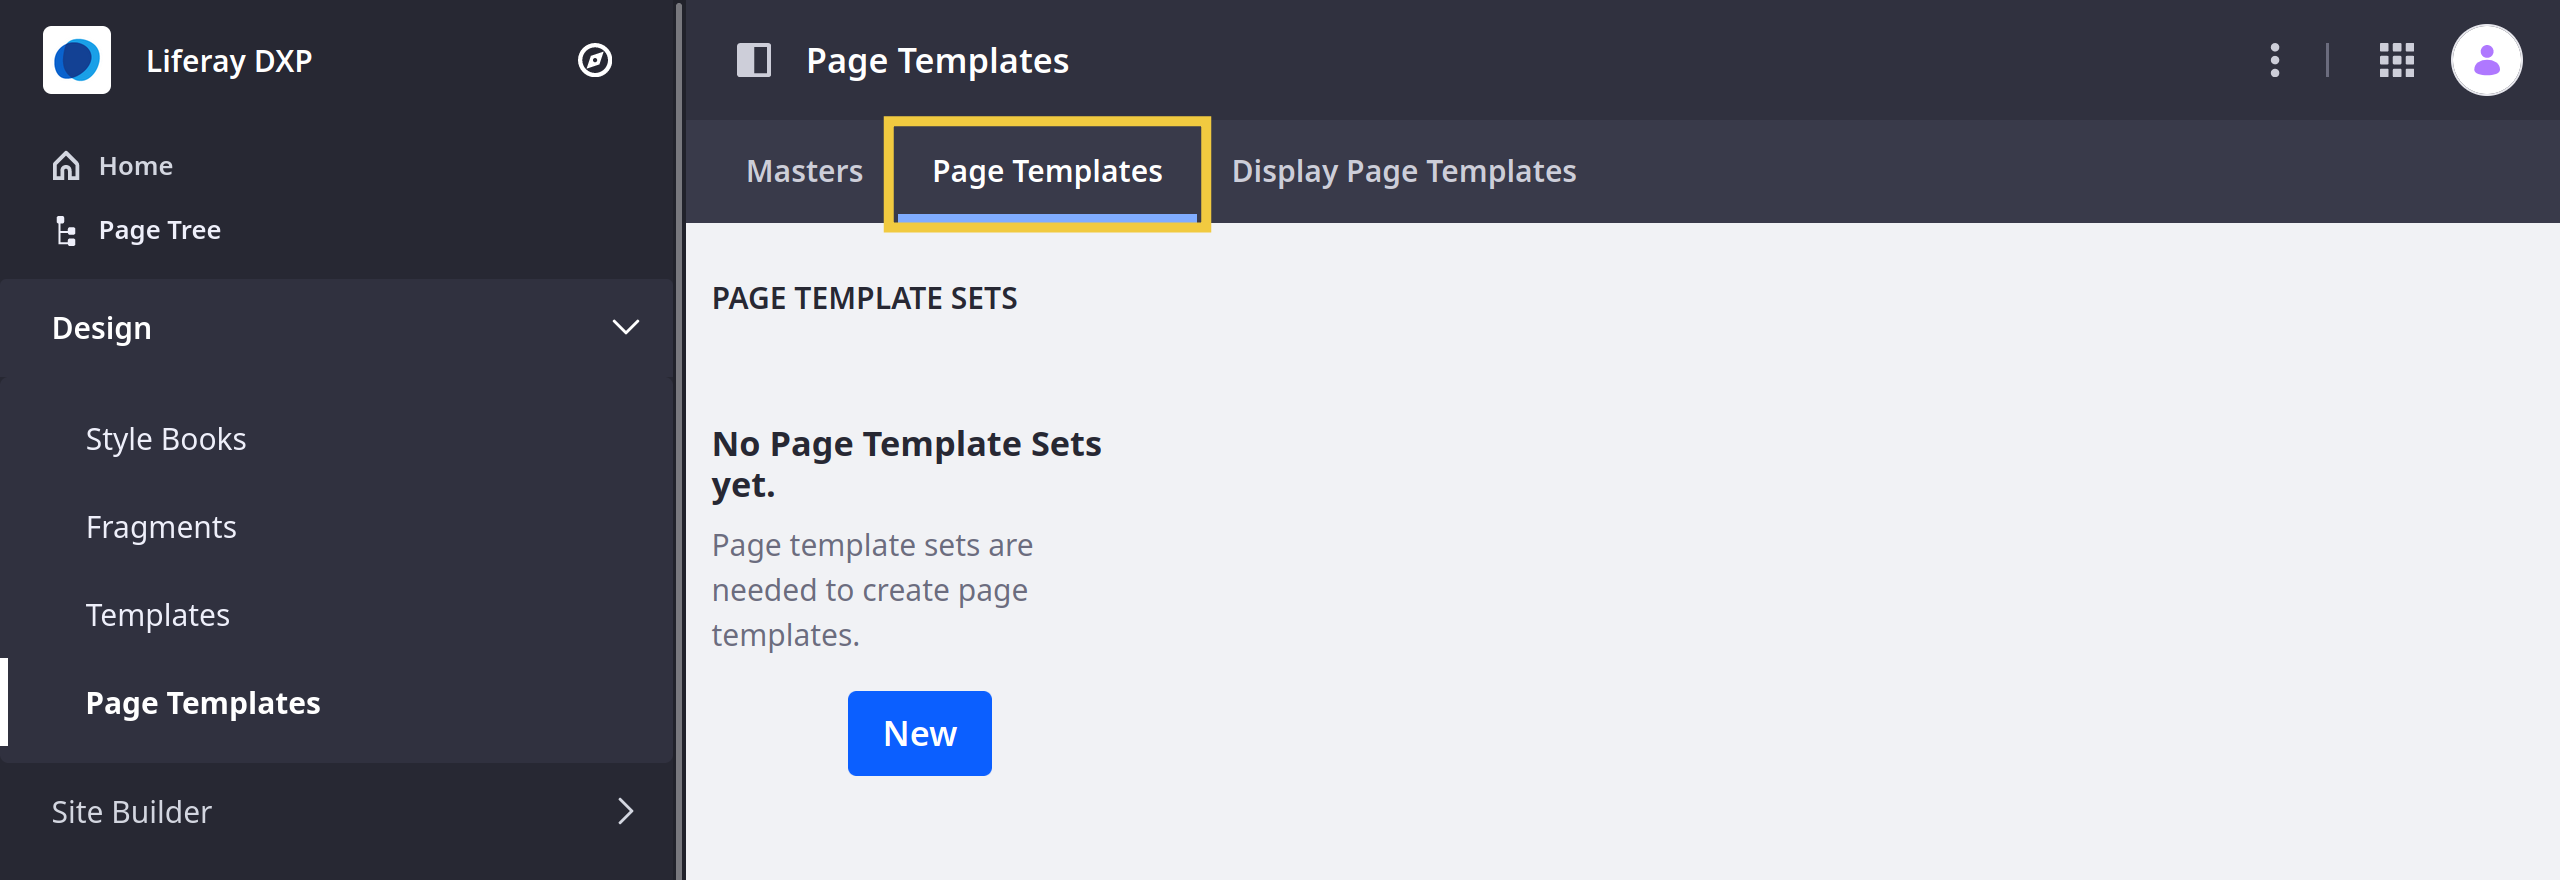 Creating a new page template set.